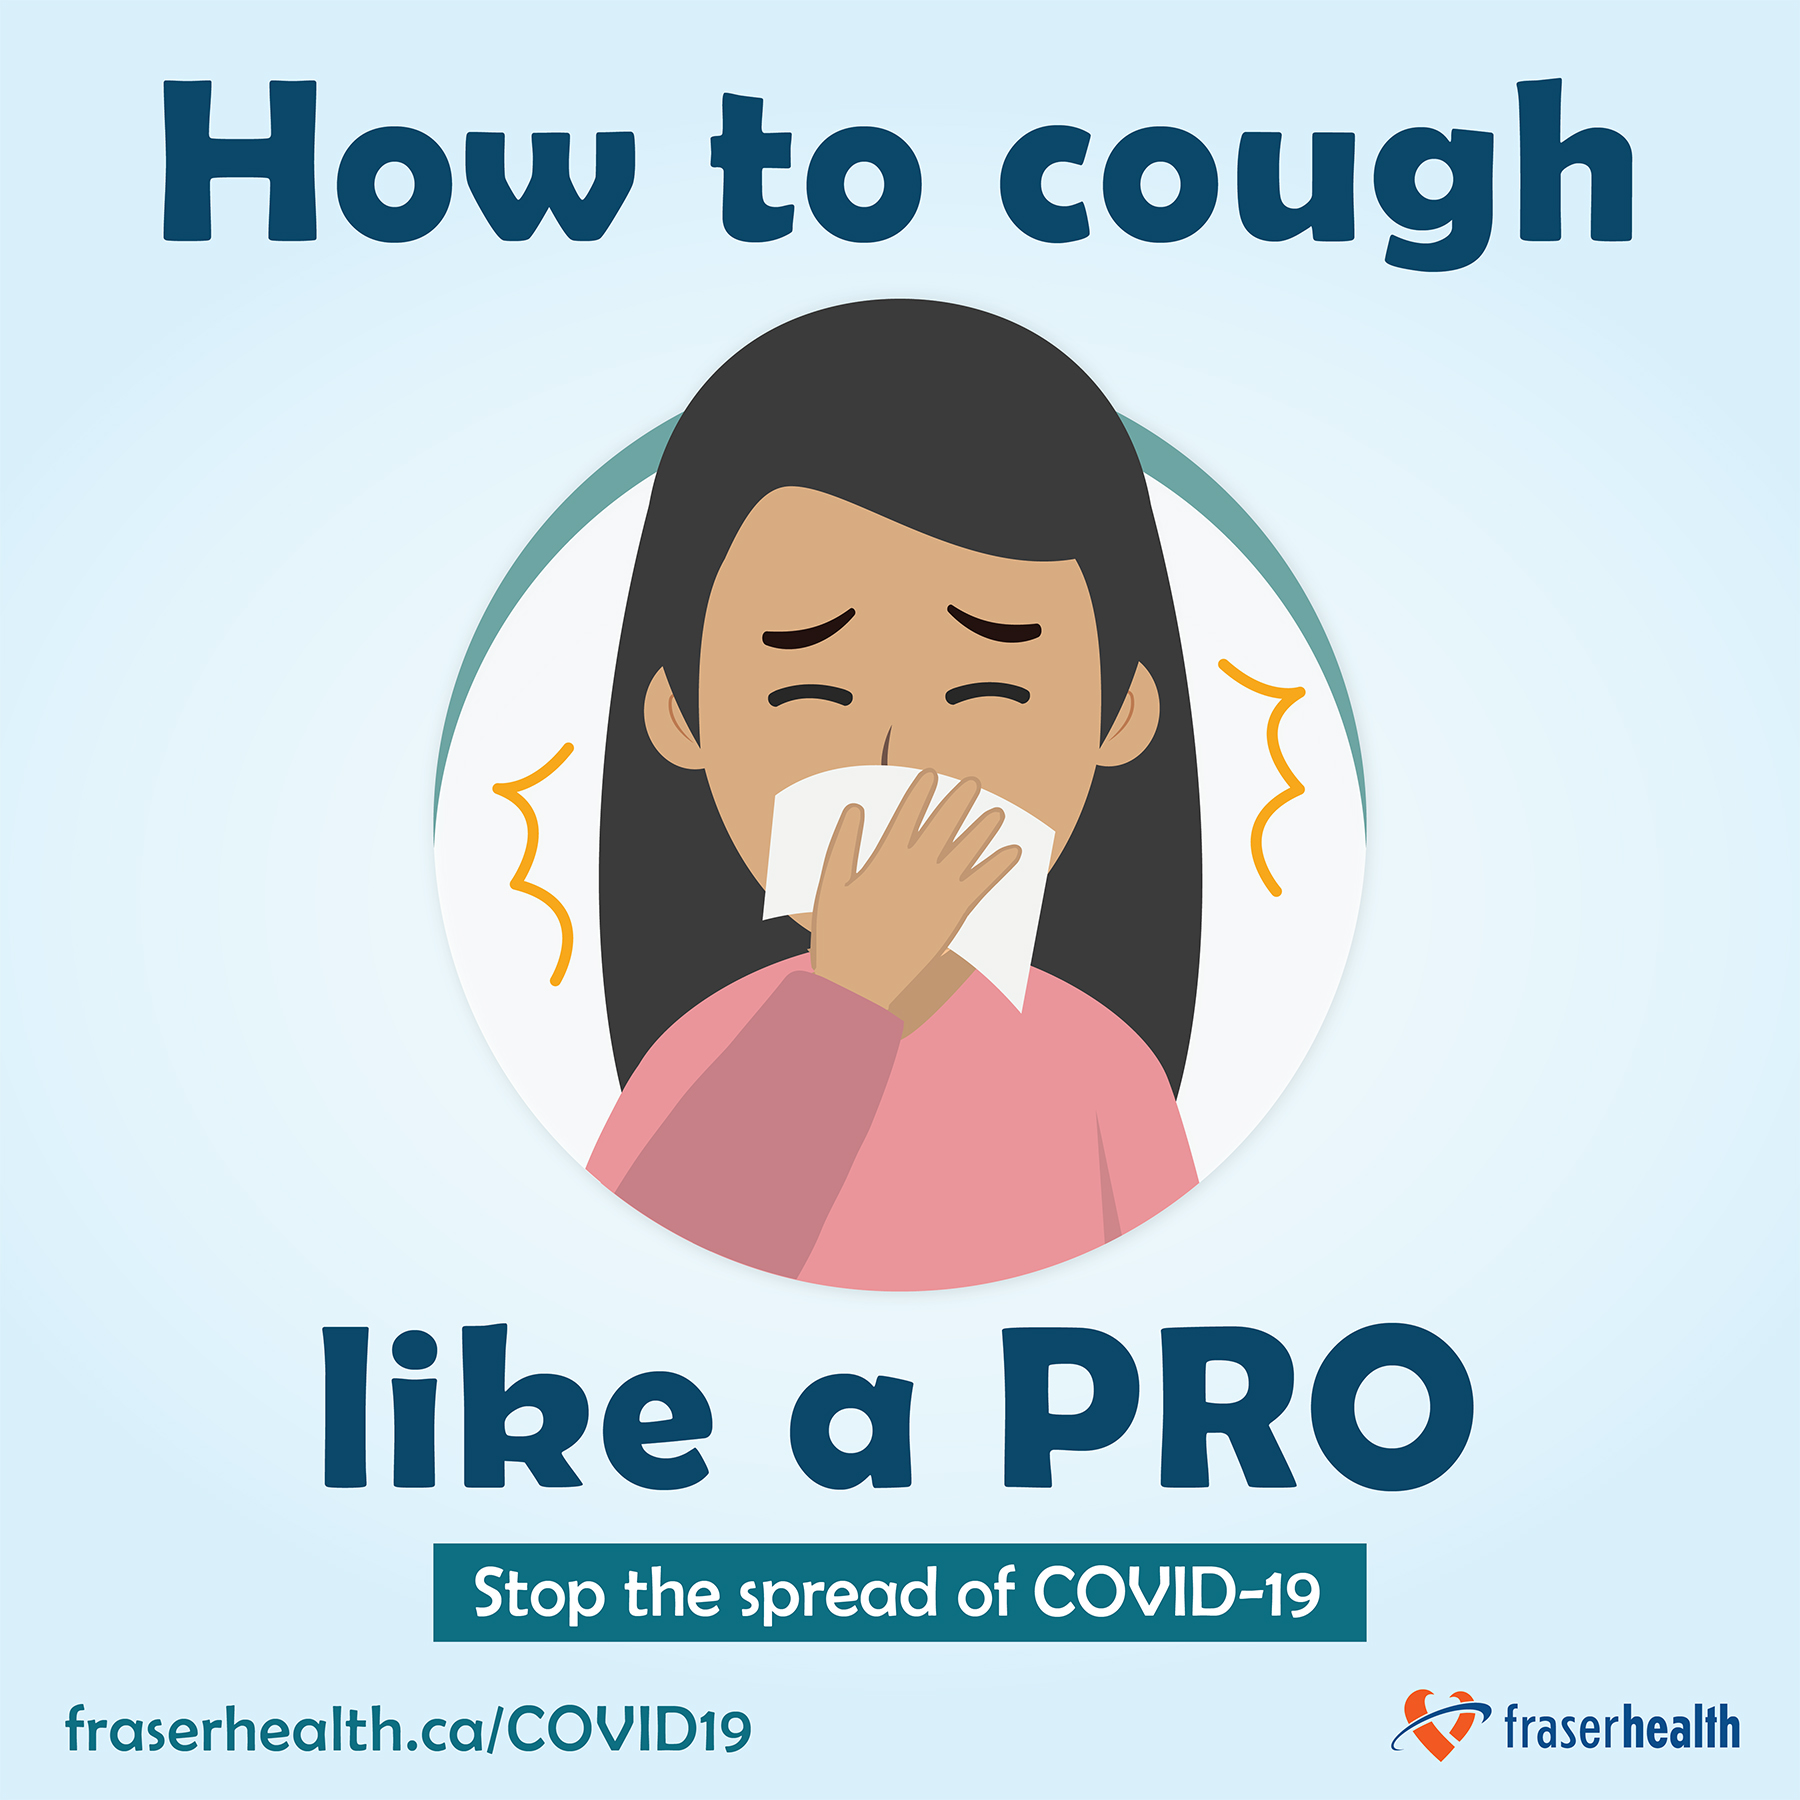 How to cough like a pro graphic with female character for COVID-19